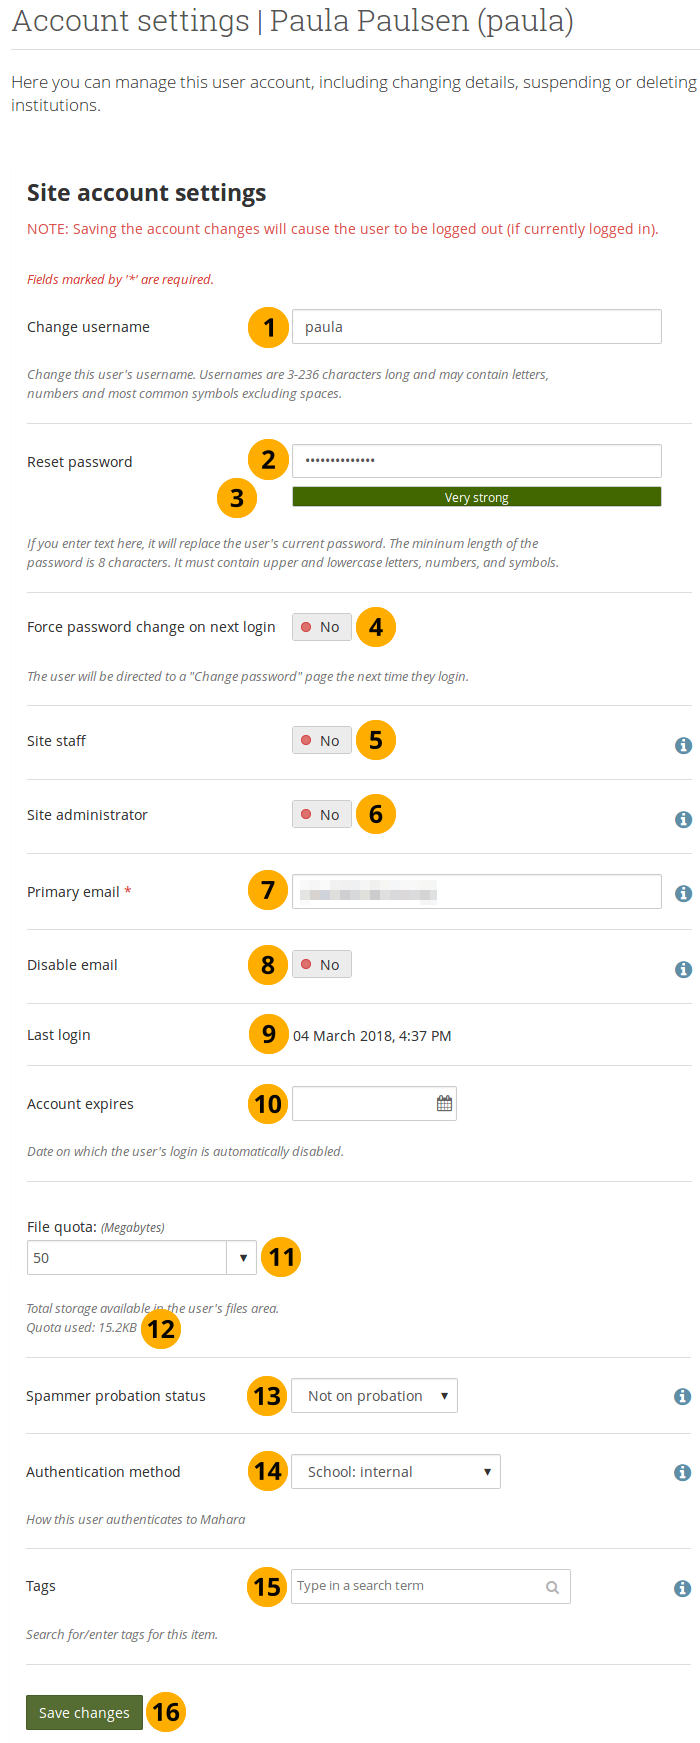 Site account settings of a user